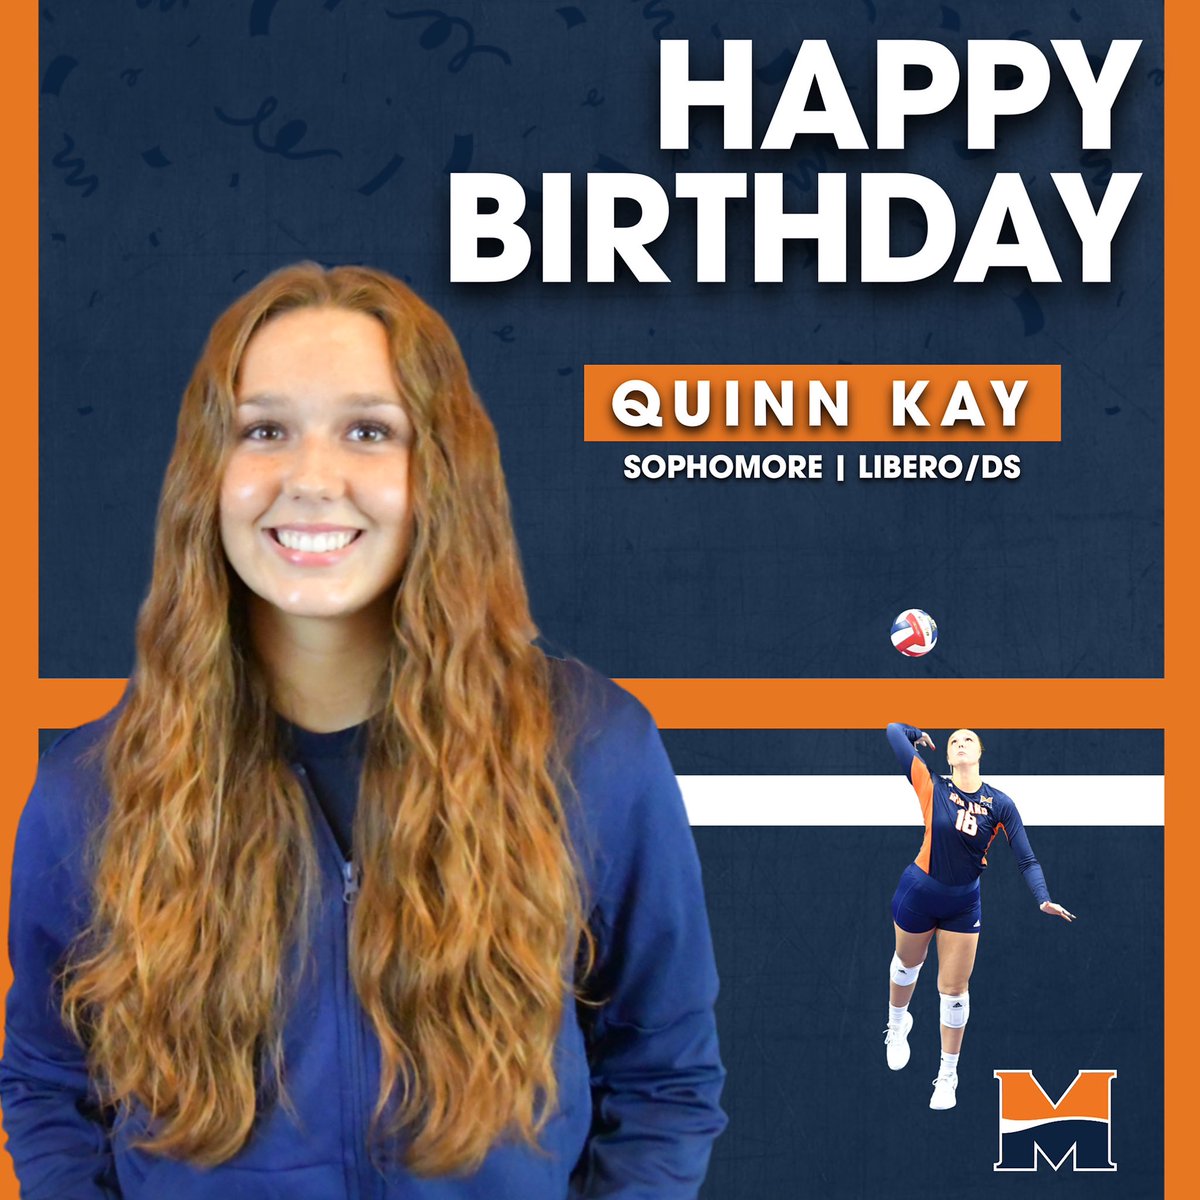 Go Quinn-y, it’s your birthday. 🥳🎶 Wishing sophomore Quinn Kay a very happy birthday. Have a great day celebrating YOU!